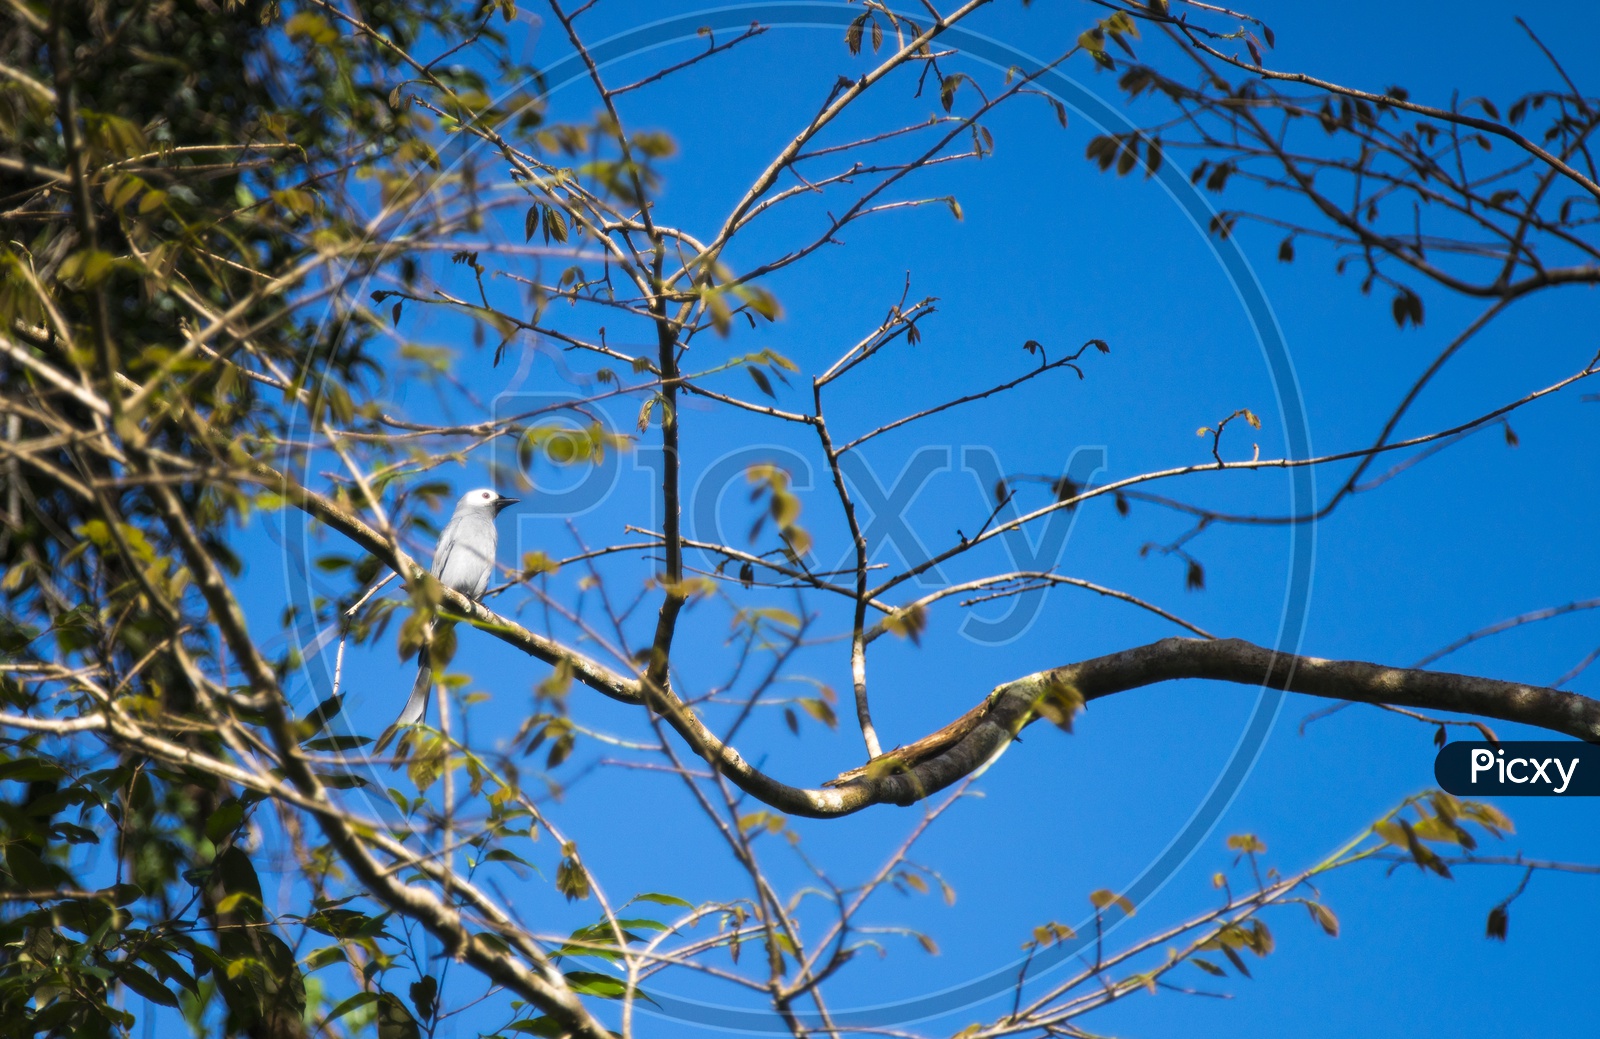 Ashy Drongo on a tree branch with blue sky background